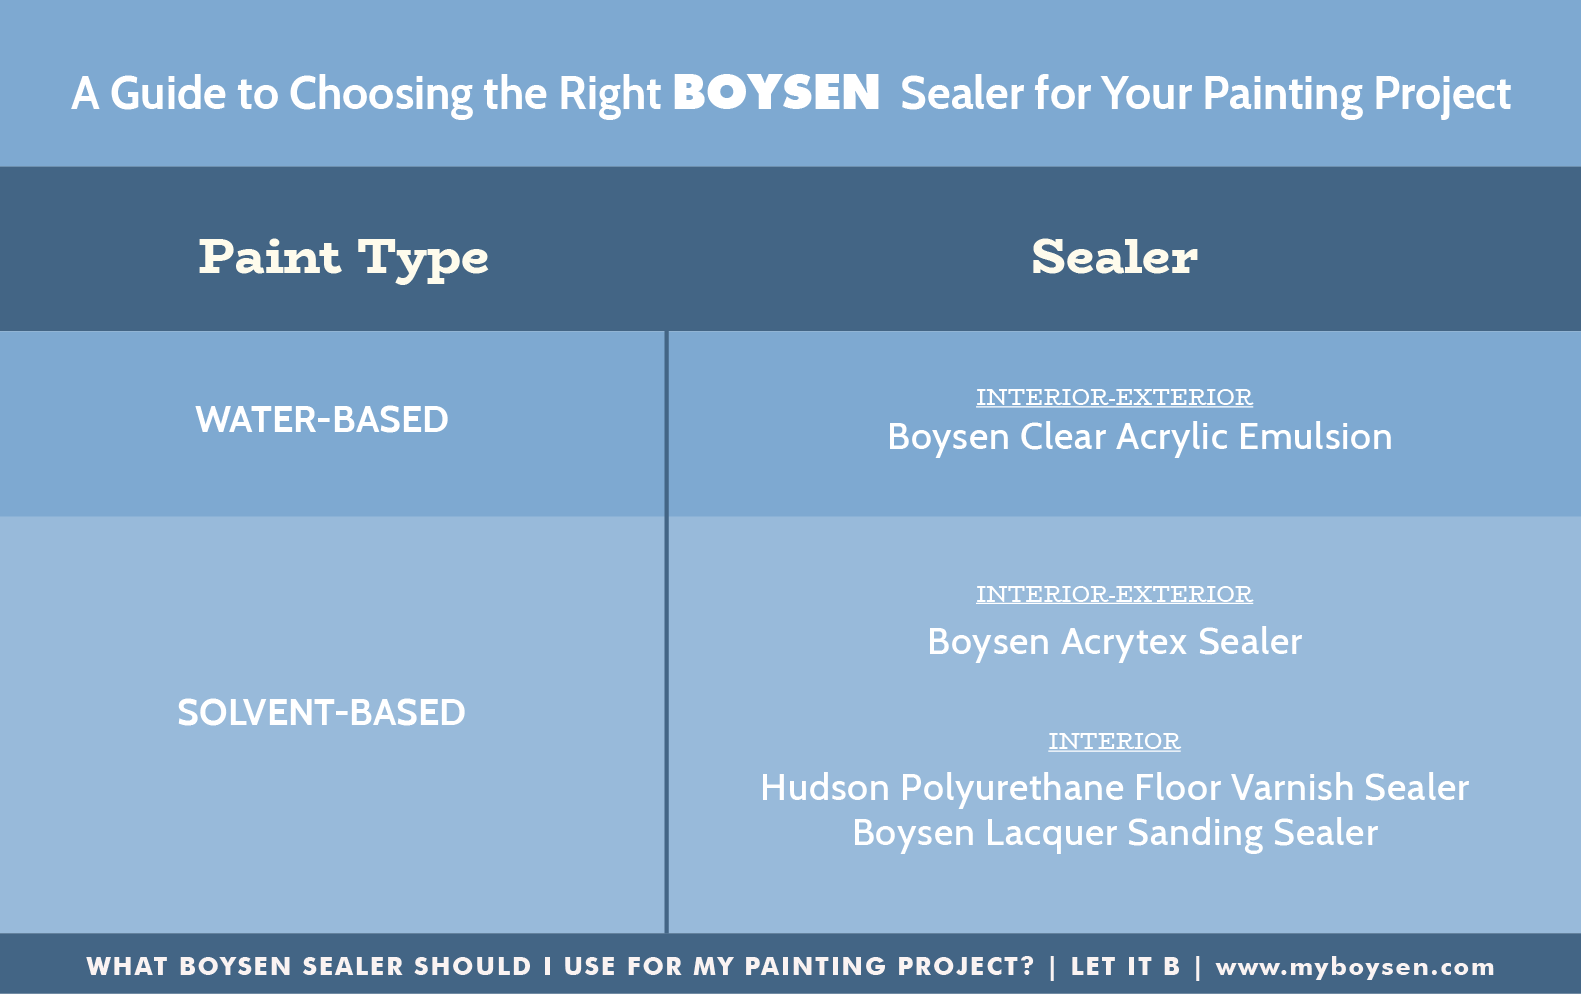 What Boysen Sealer Should I Use for My Painting Project? | MyBoysen